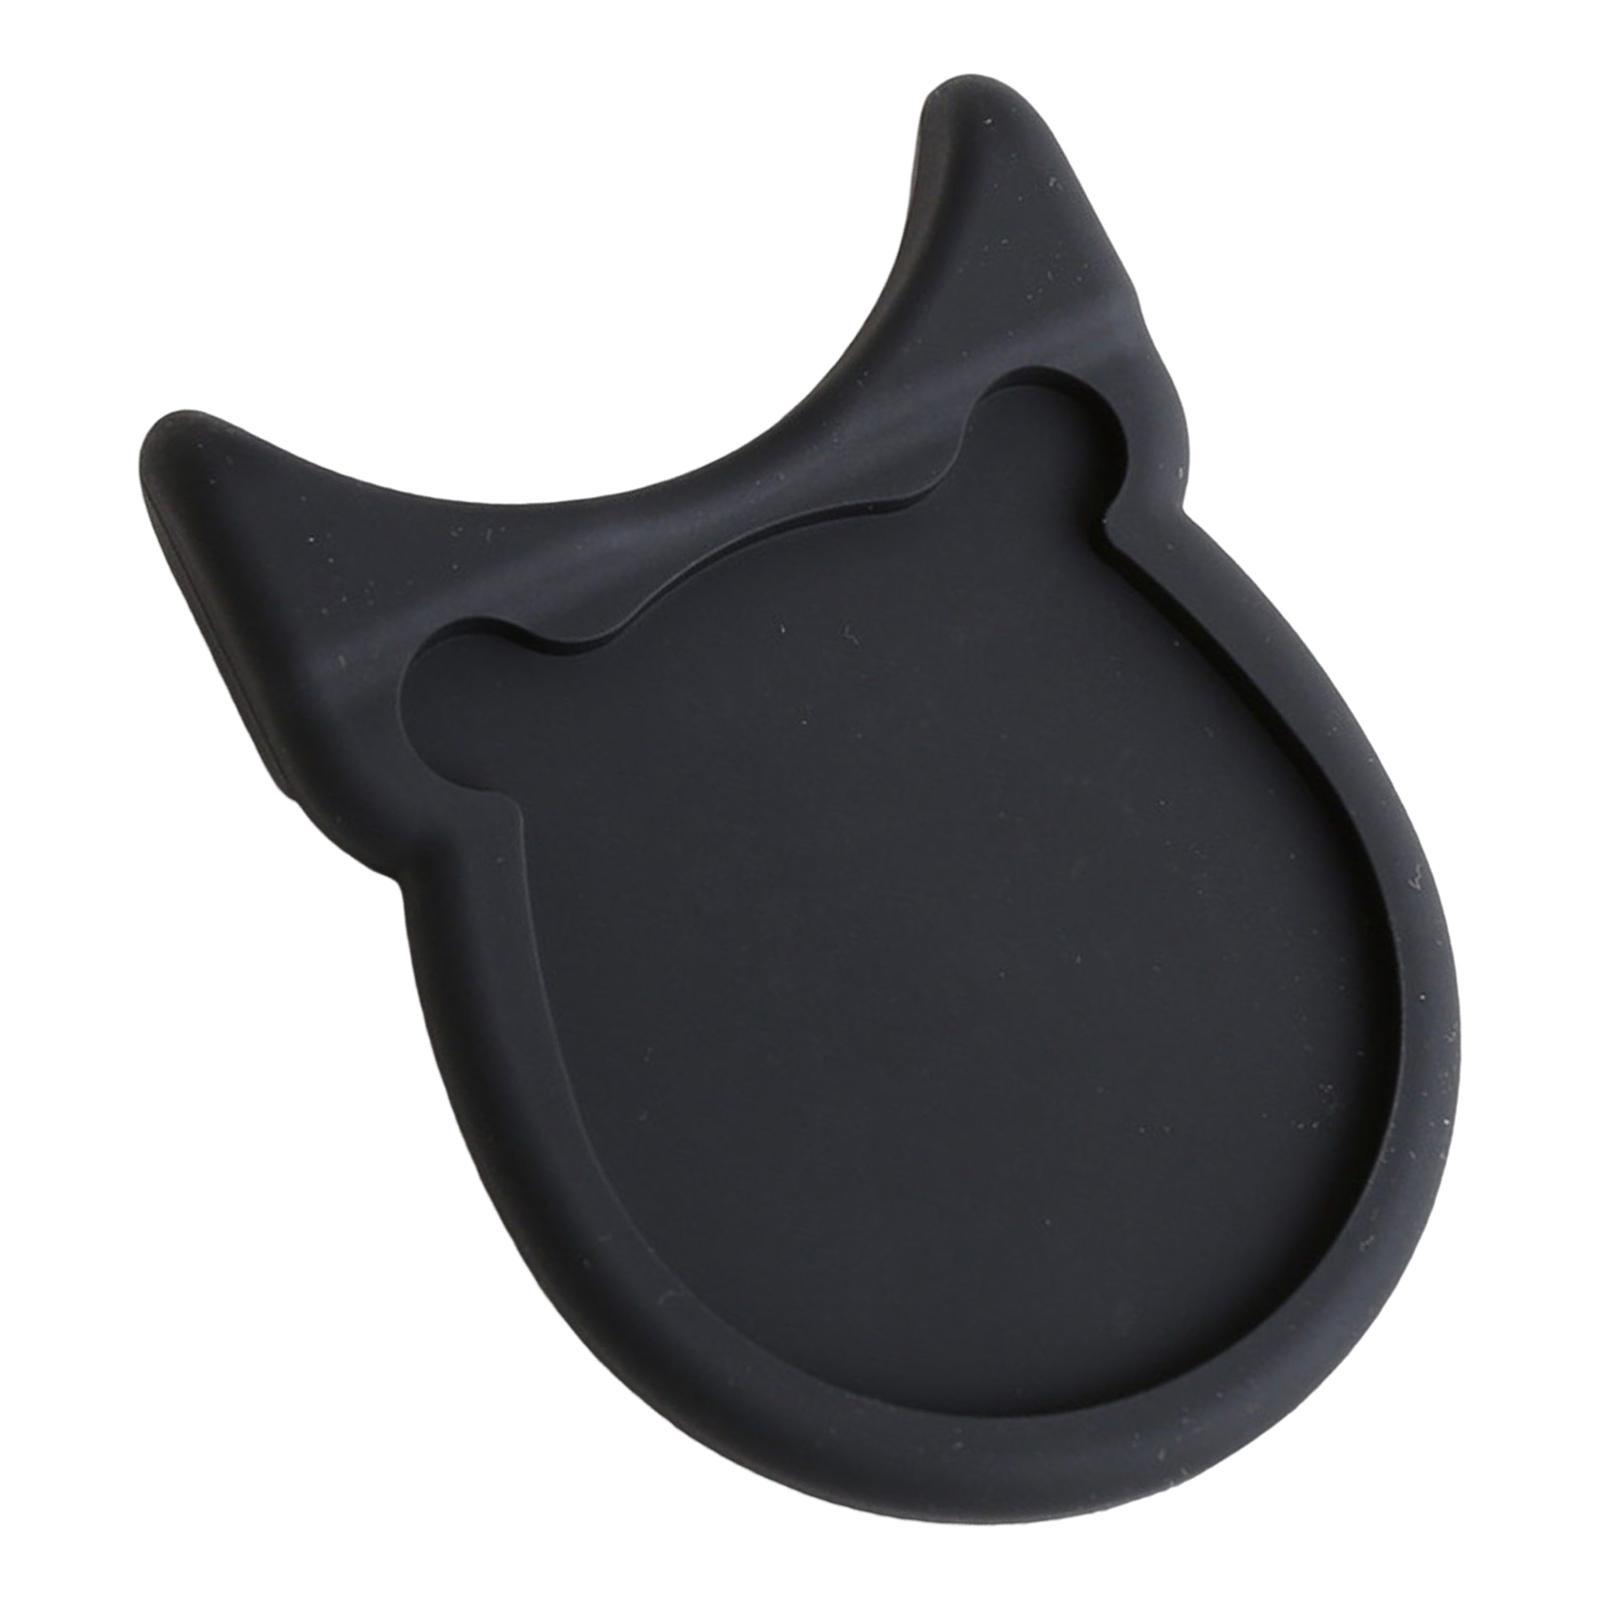 Household Guitar Rest Lightweight Stable  Silicone Sturdy for Bass Stand